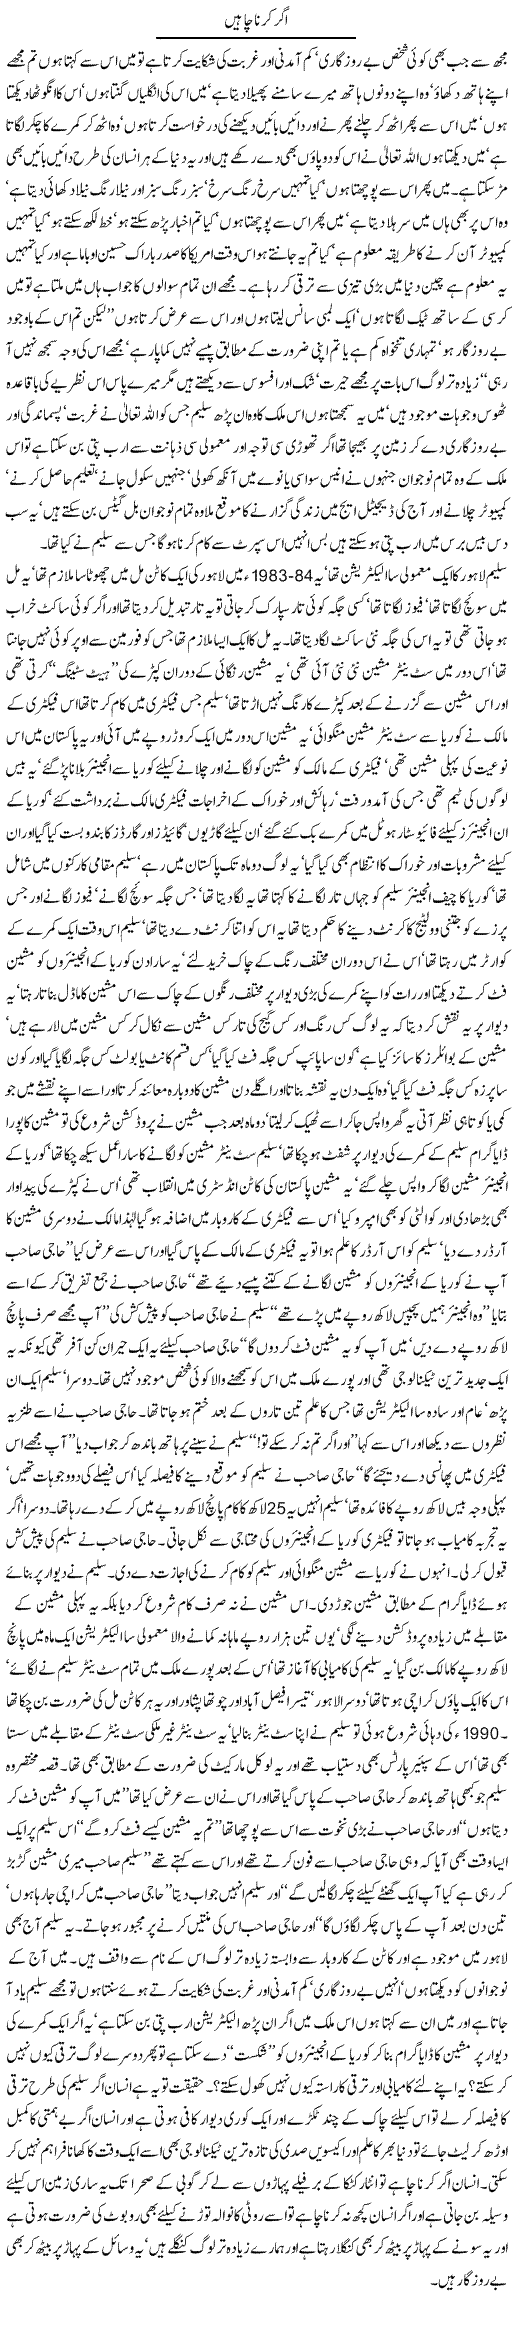 If Wants To Do Express Column Javed Chaudhry 7 November 2010